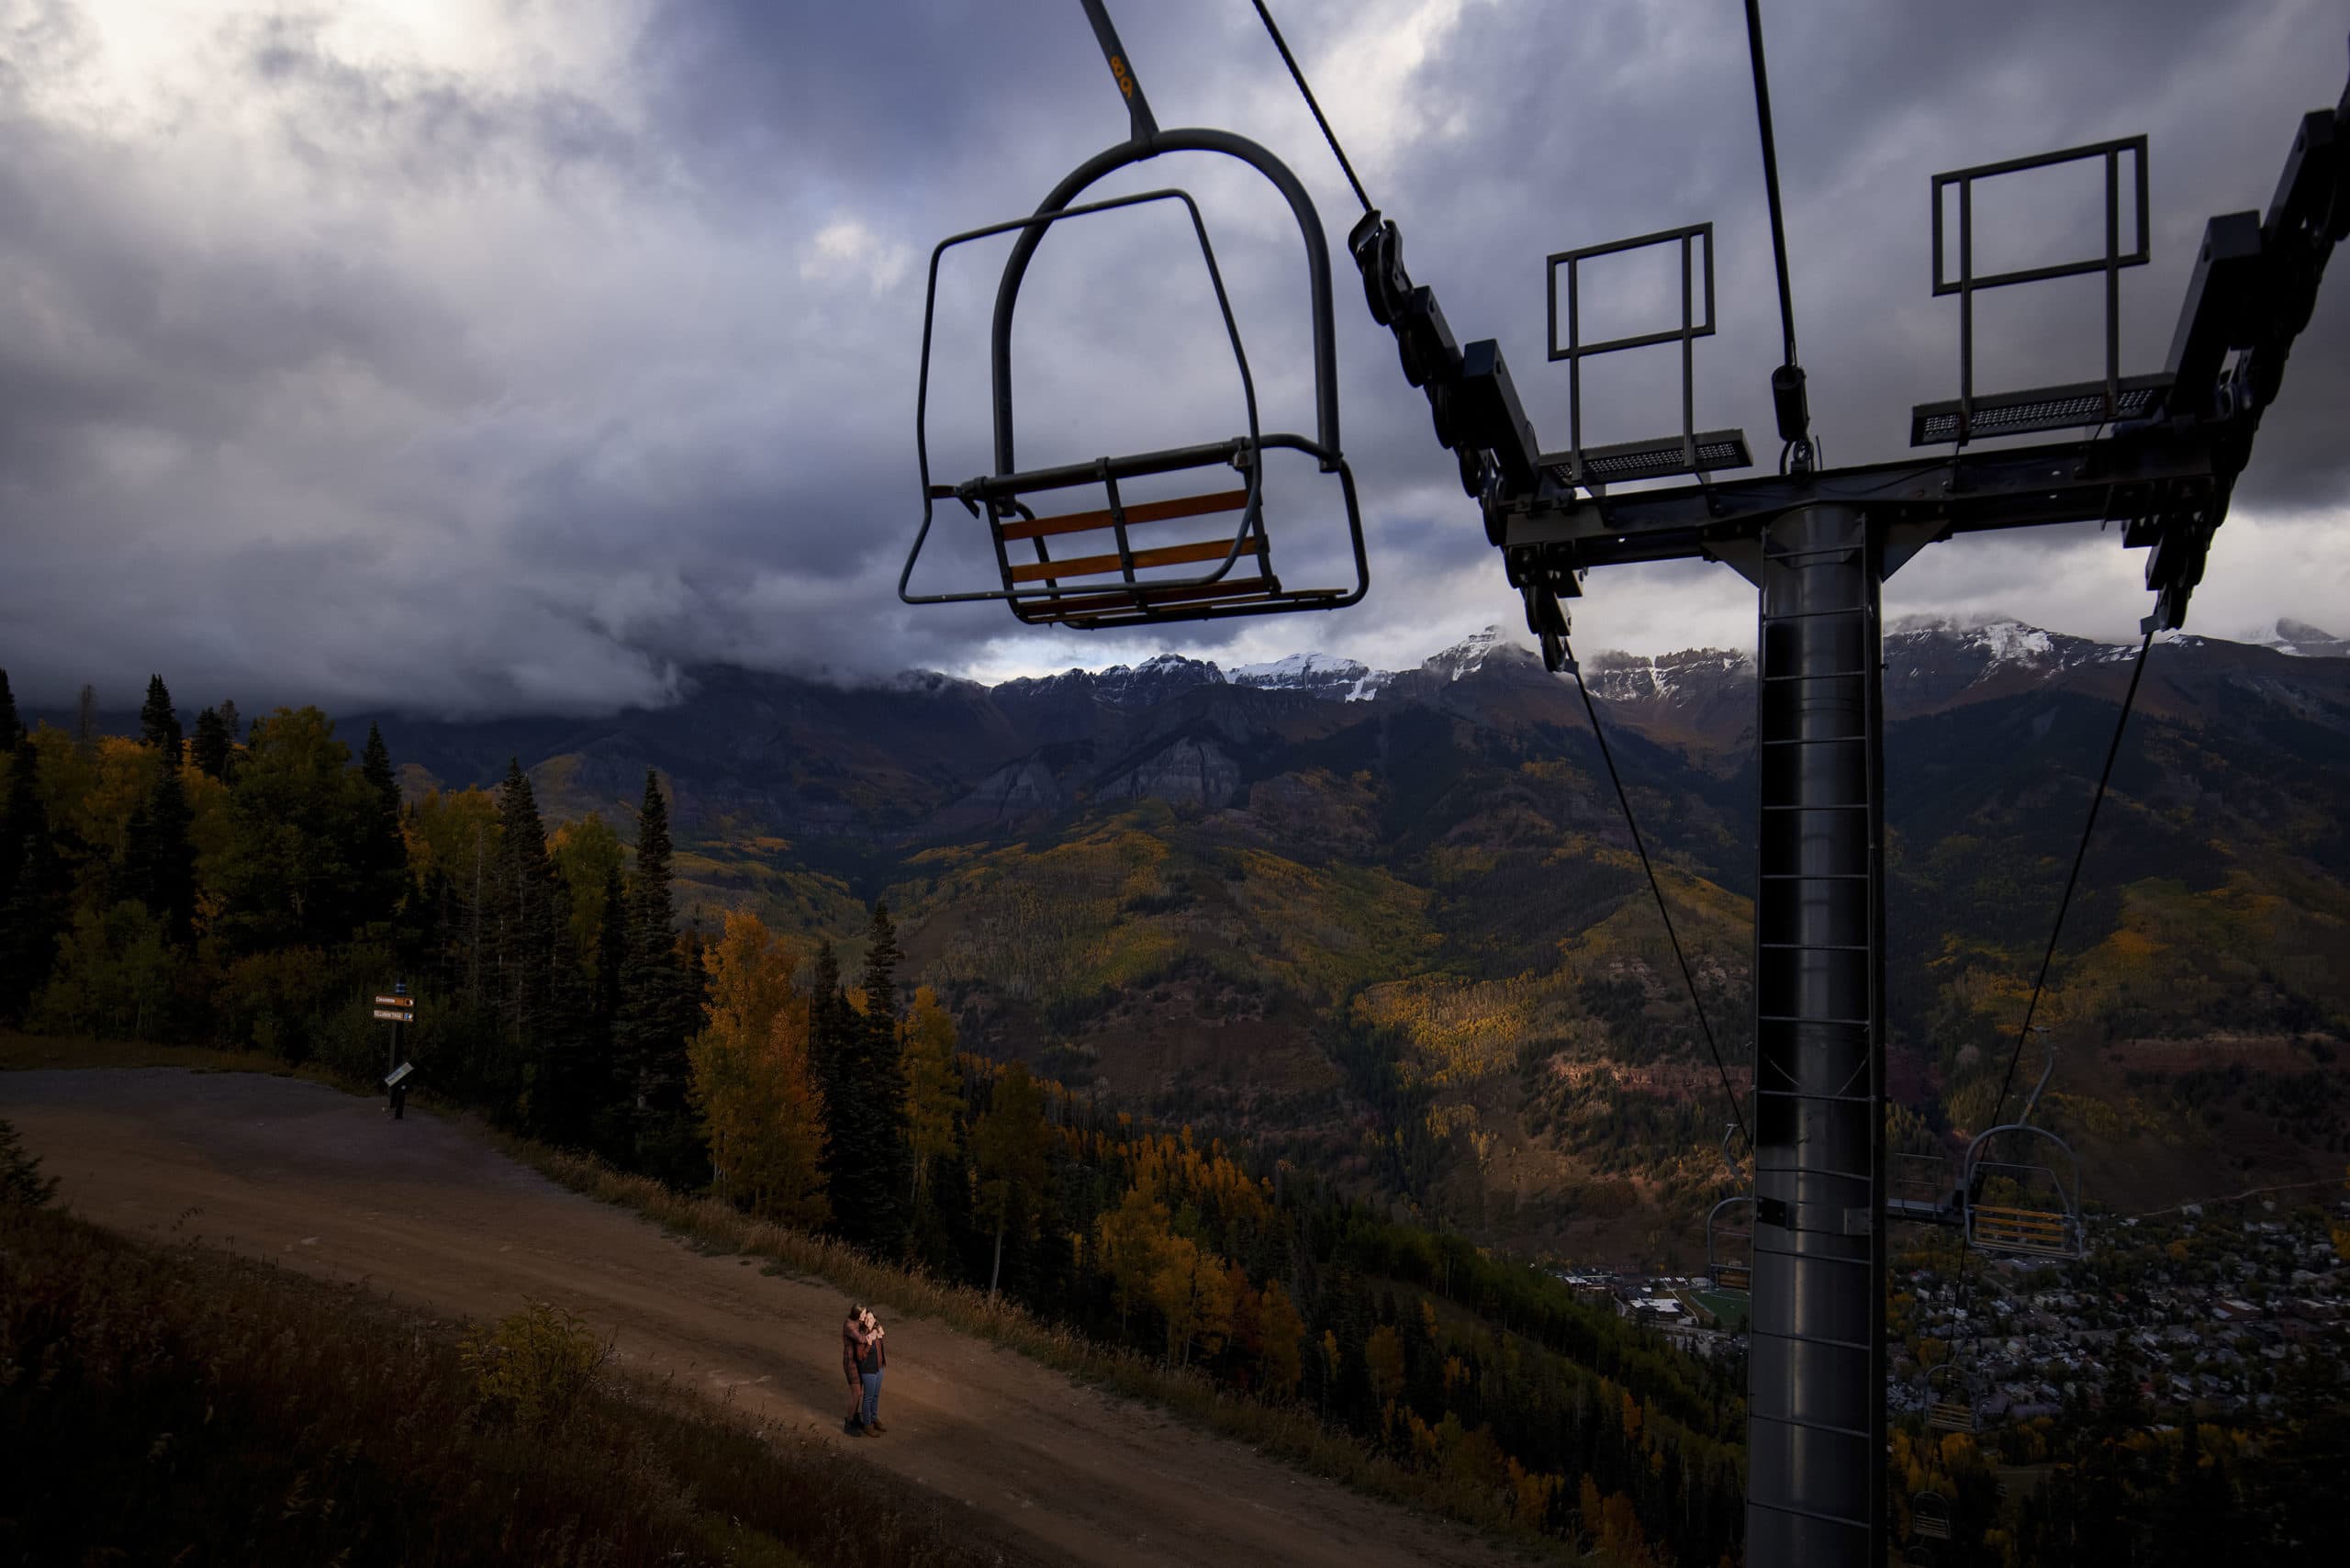 A couple embraces at twilight on Telluride Trail under the Coonskin chairlift during their engagement at Telluride Ski Resort